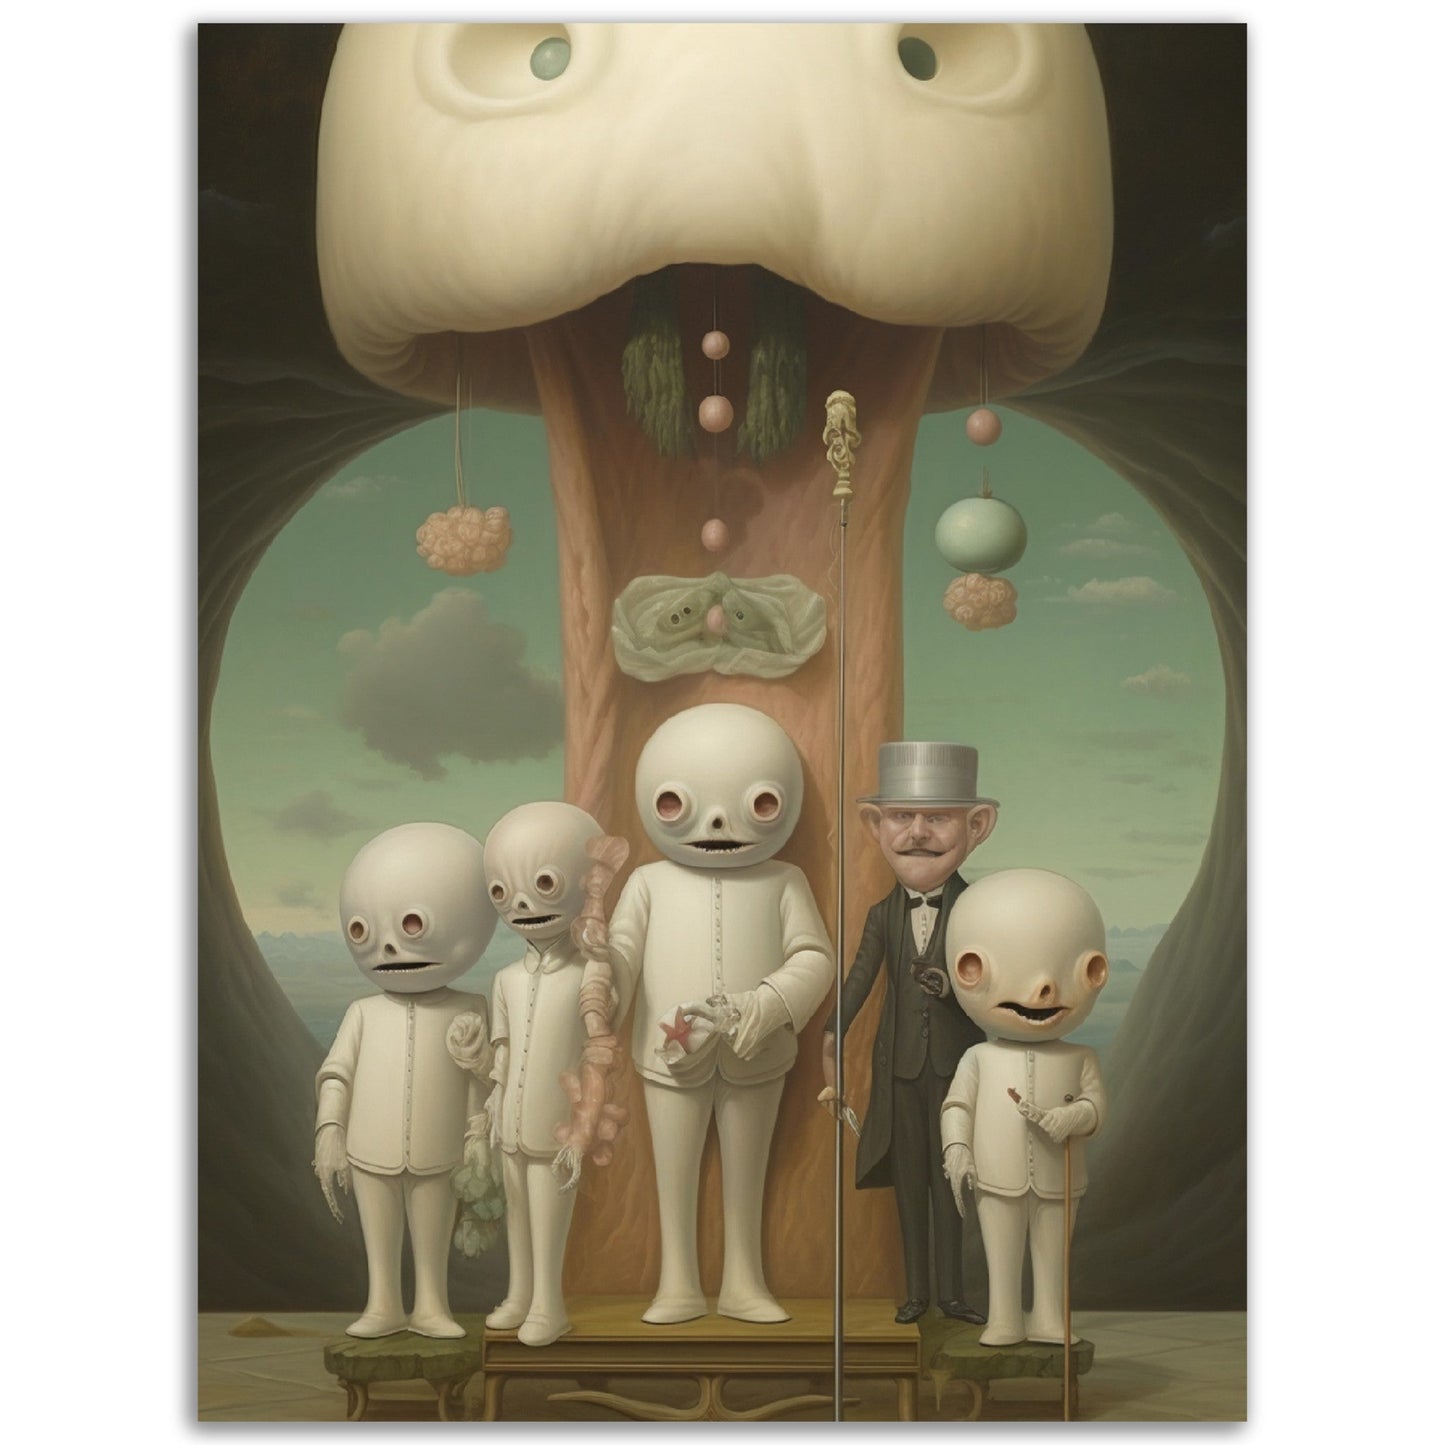 A mesmerizing Alien Dignitary Group 3 capturing a group of people standing in front of a magnificent mushroom, creating an unforgettable wall art masterpiece.